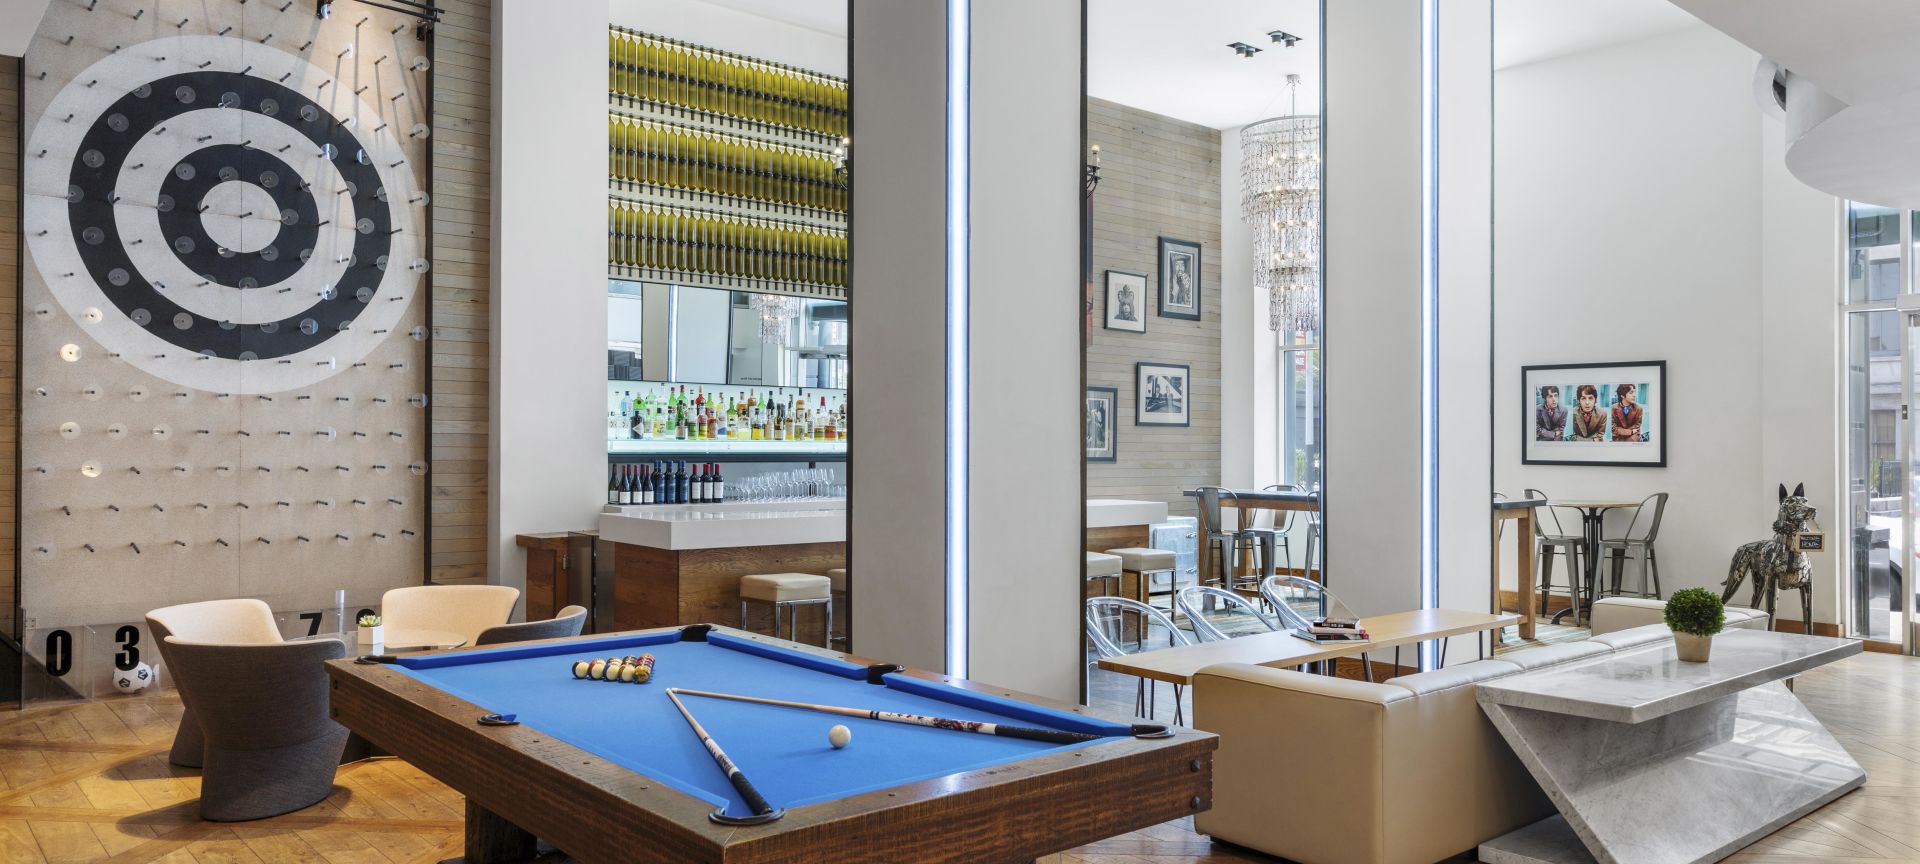 Hotel Lobby with Pool Table